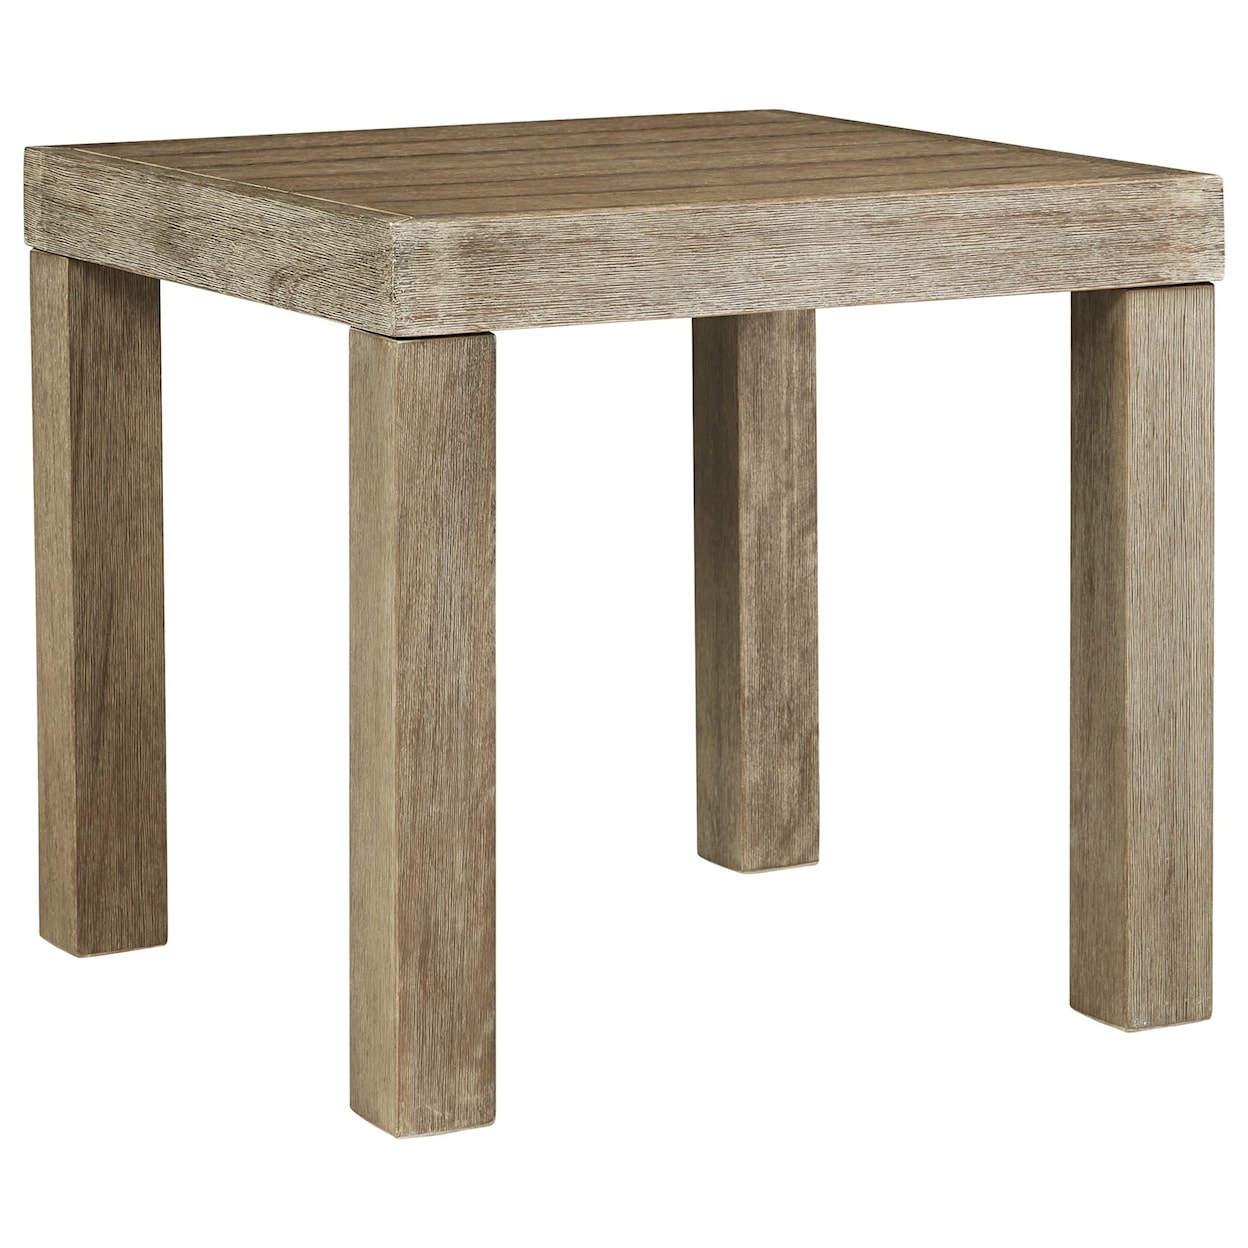 Signature Design by Ashley Silo Point Square End Table